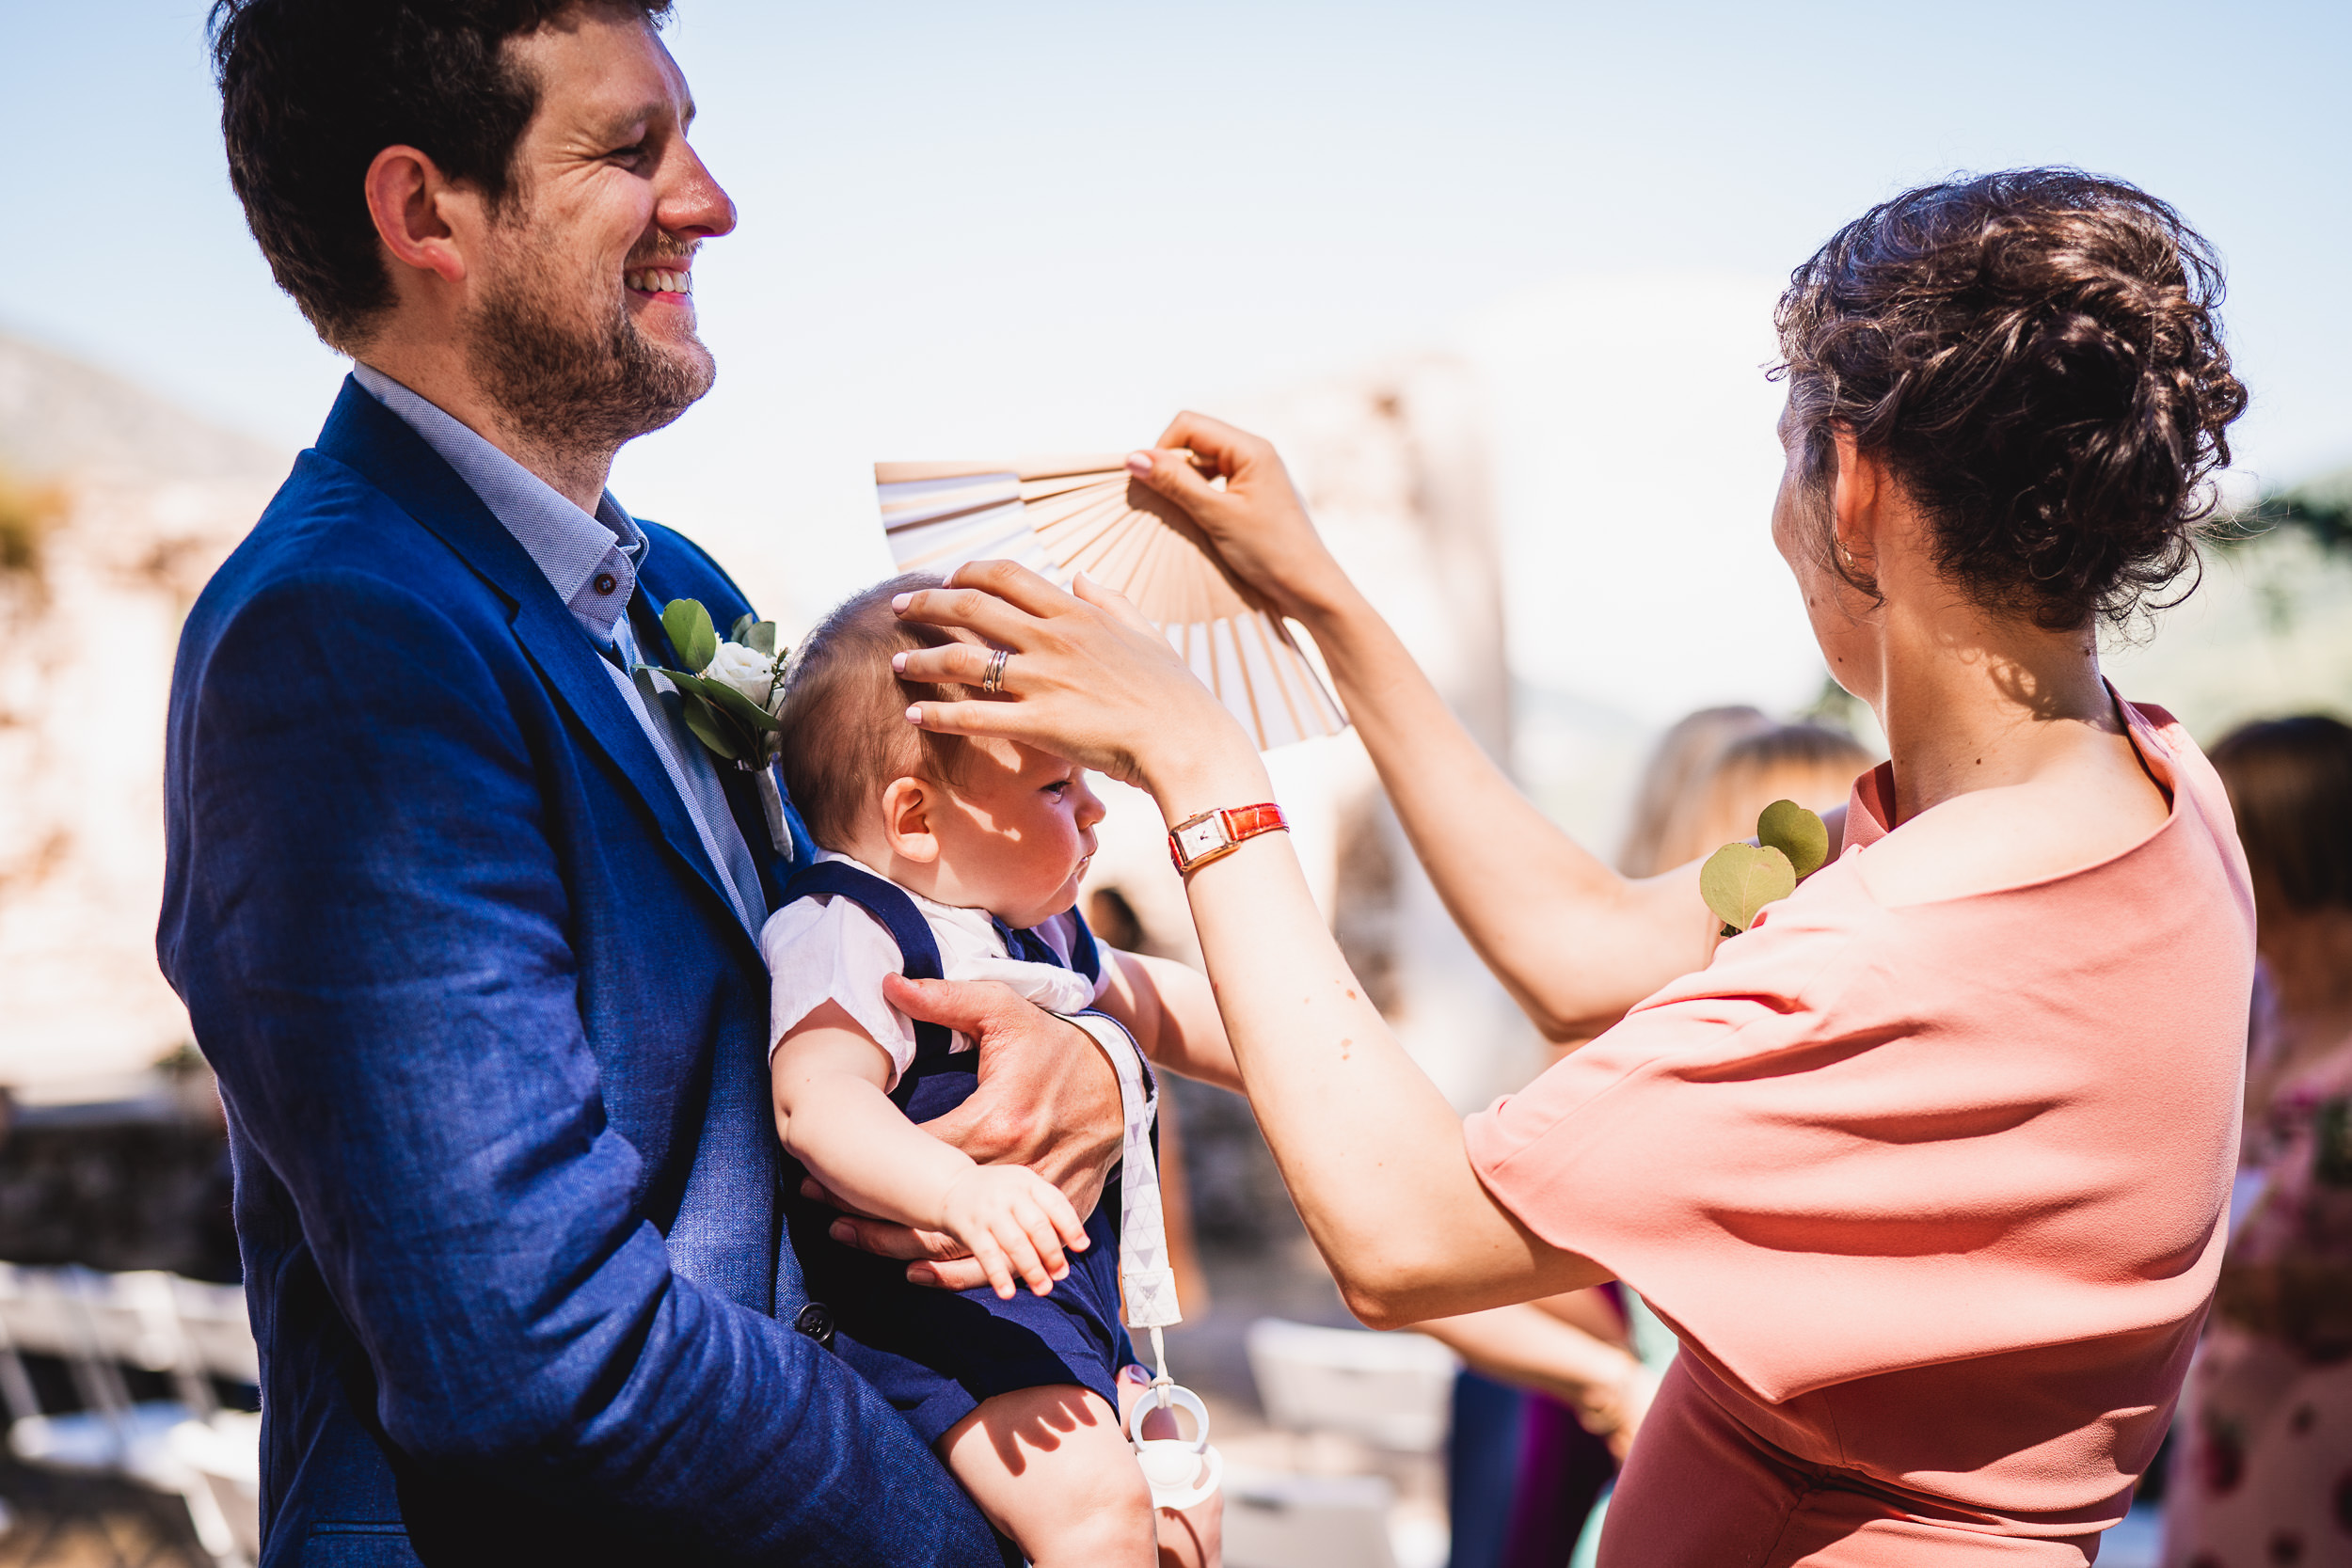 A wedding photographer captures a woman holding a baby during a ceremony.